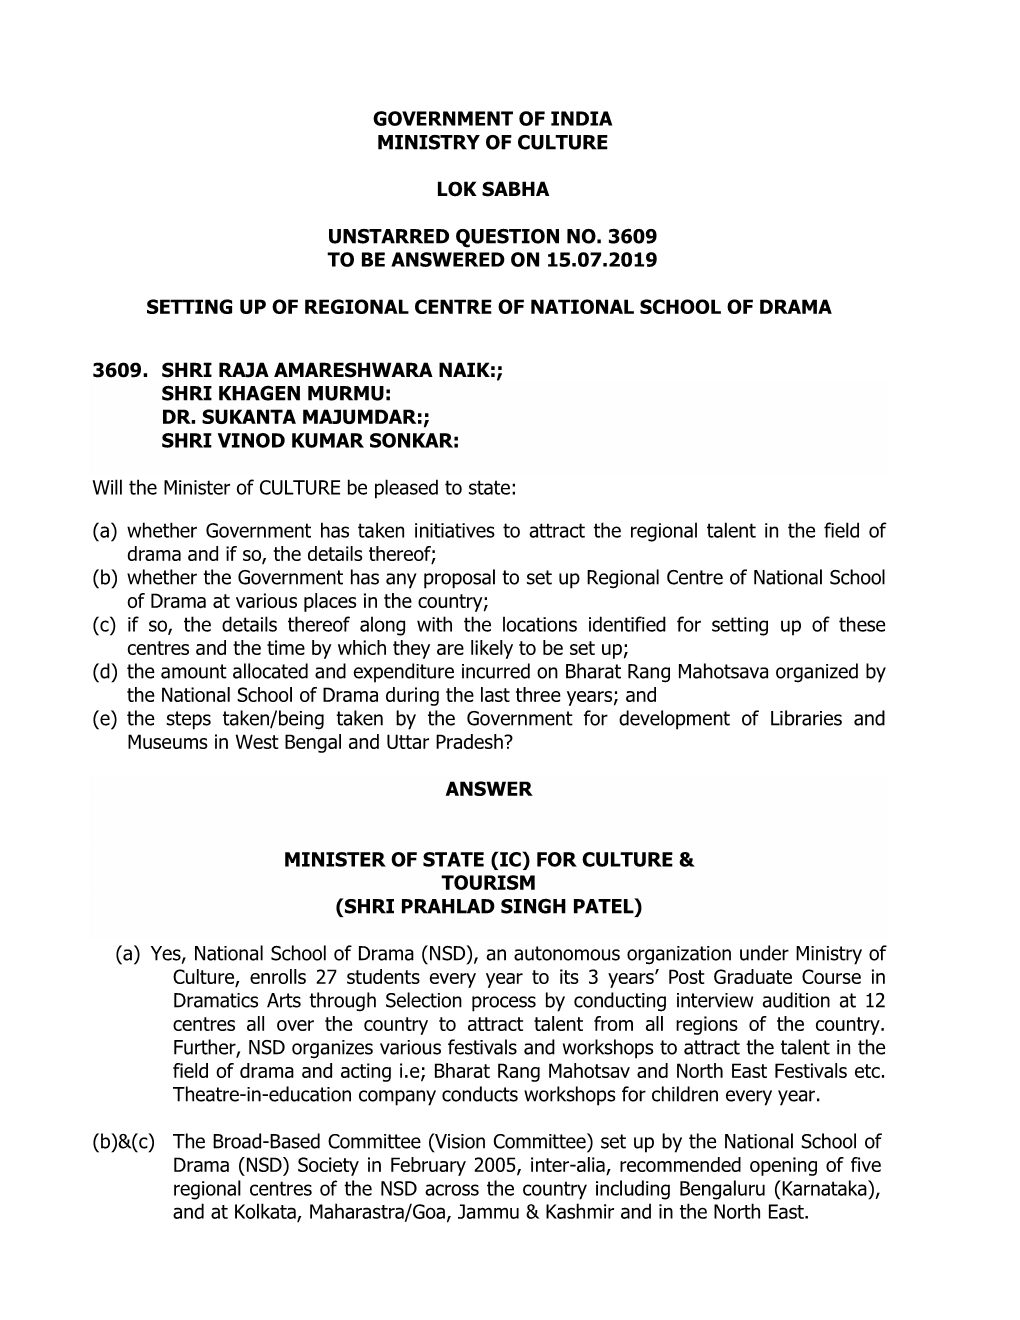 Government of India Ministry of Culture Lok Sabha Unstarred Question No. 3609 to Be Answered on 15.07.2019 Setting up of Regiona